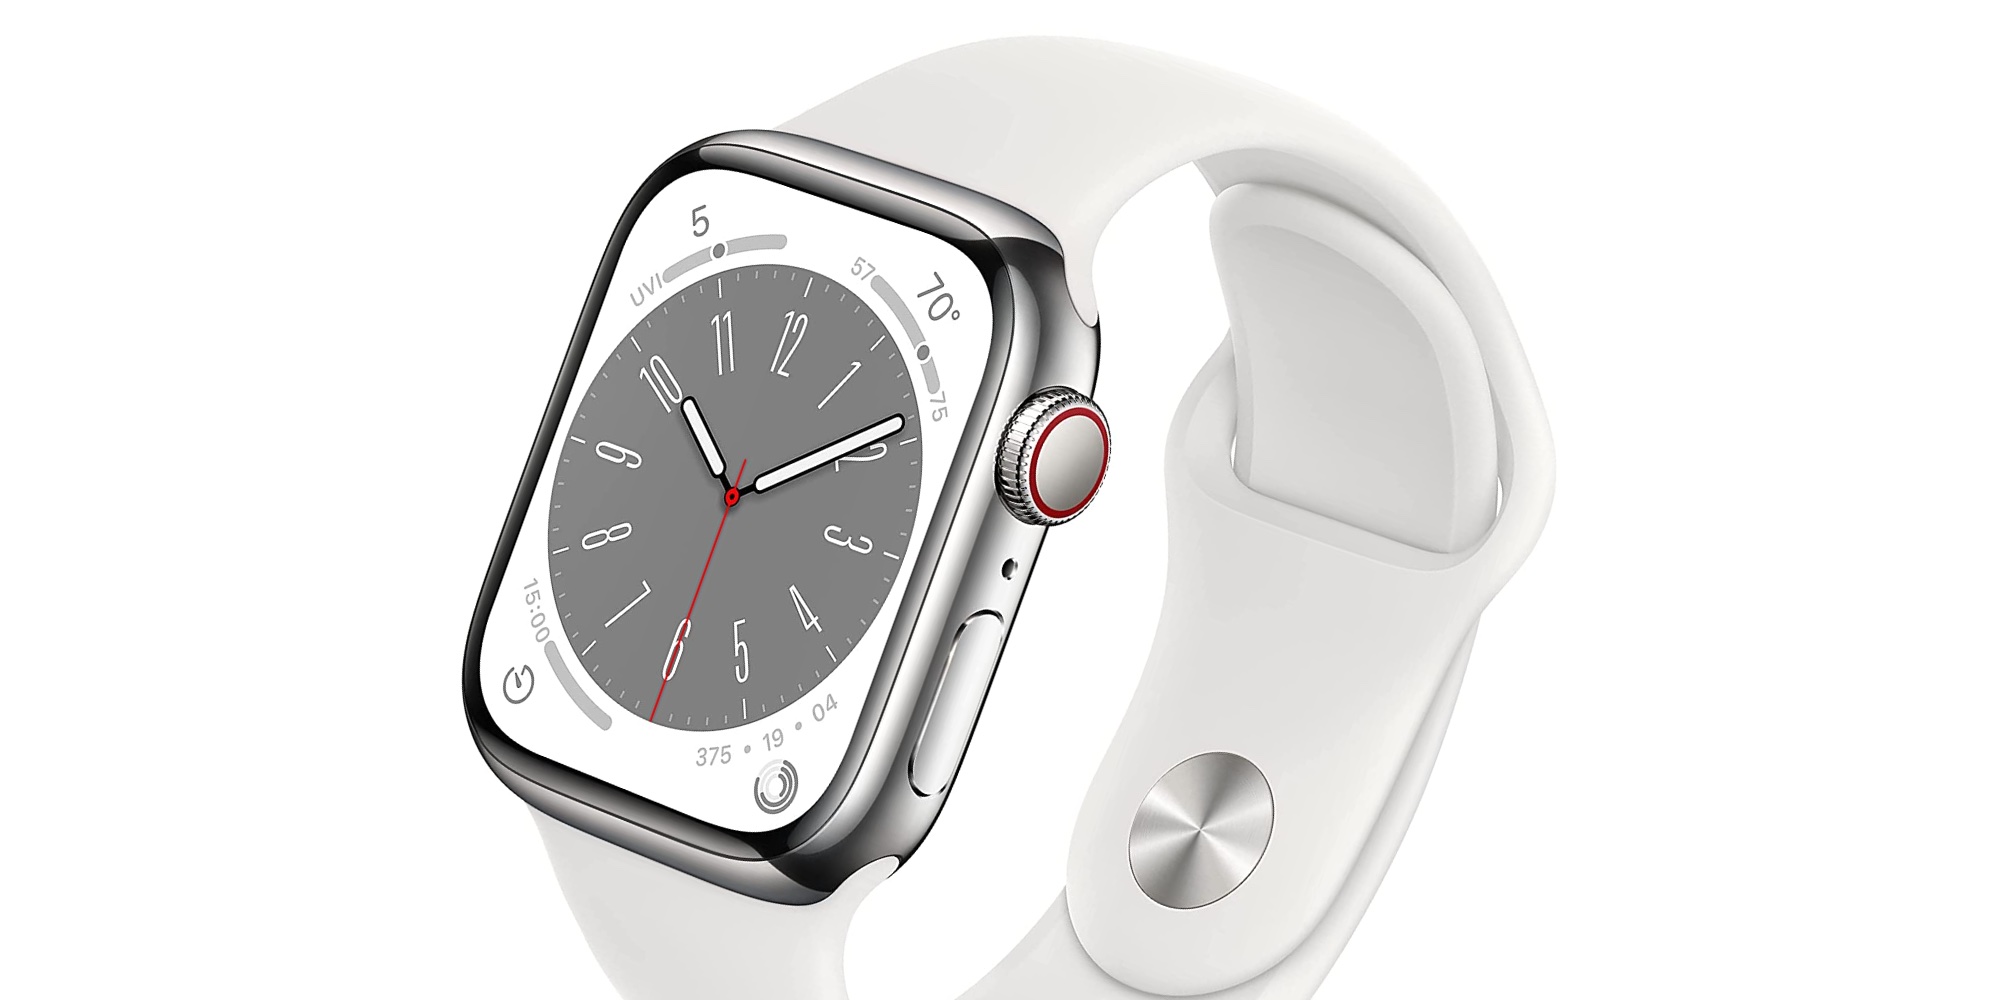 Roundup: Apple Watch Series 3 + Series 1 specs and prices compared - 9to5Mac